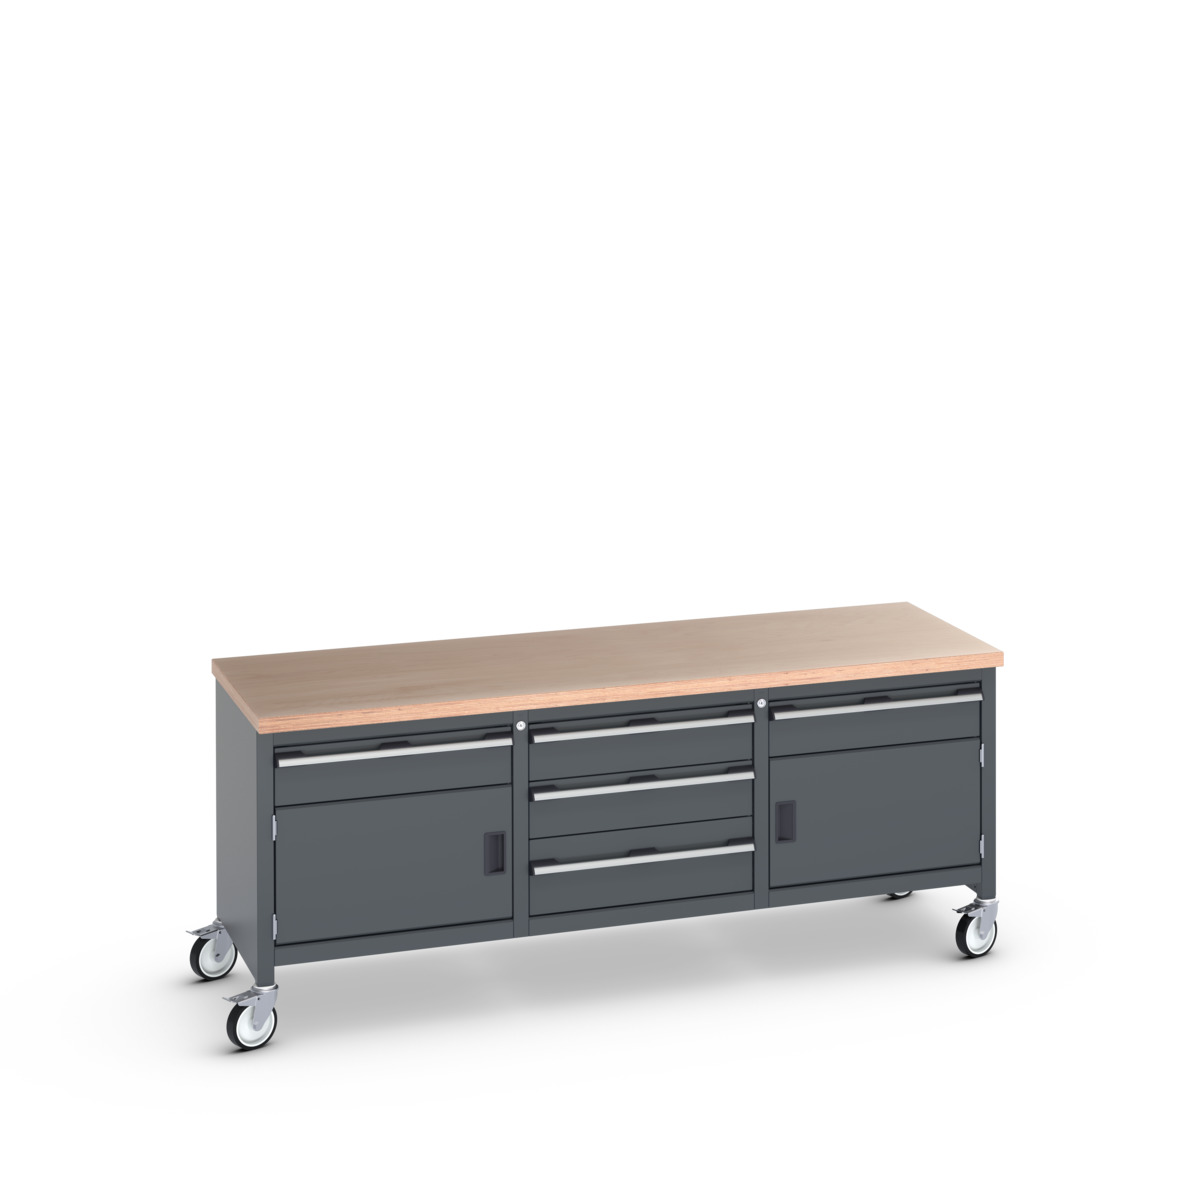 41002133.77V - cubio mobile storage bench (mpx)